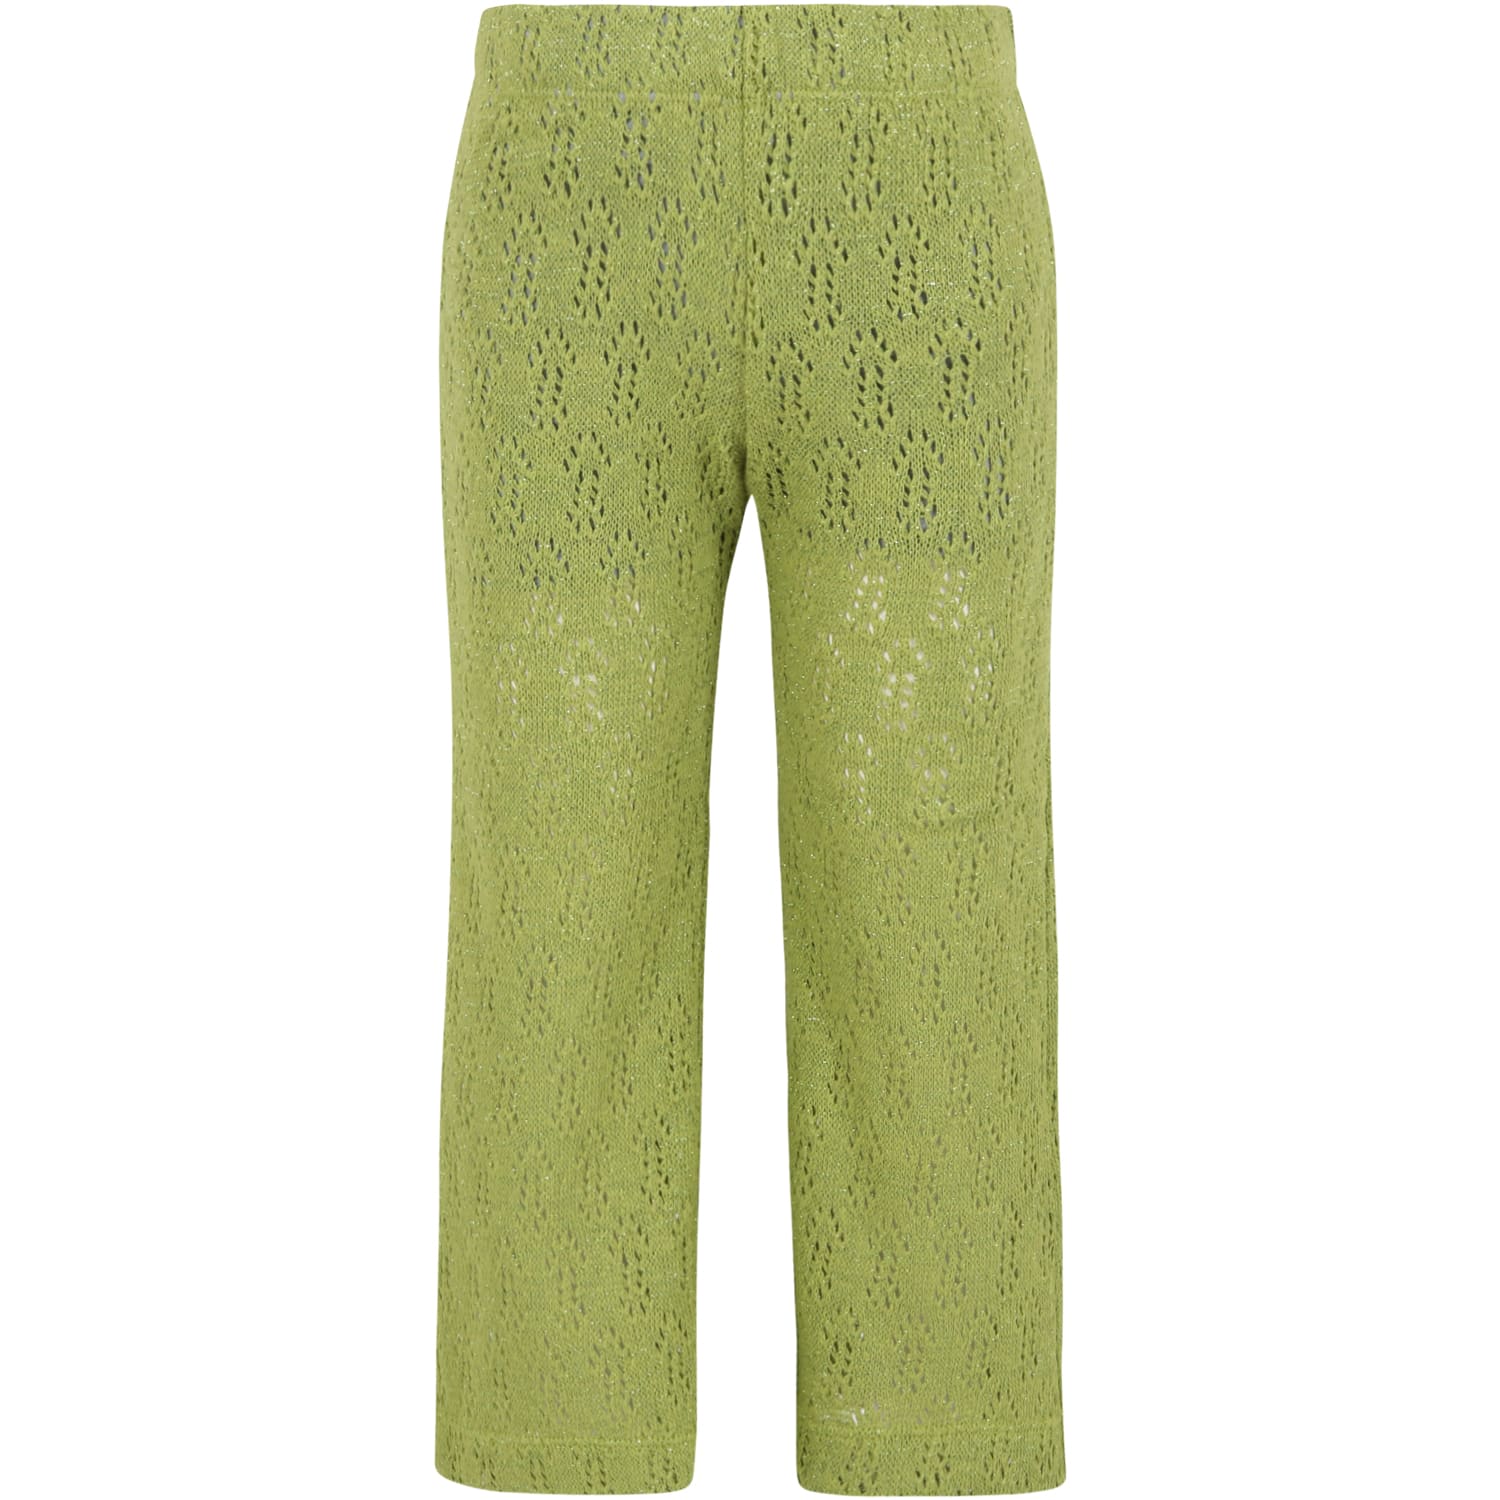 CAFFE' D'ORZO GREEN TROUSERS FOR GIRL